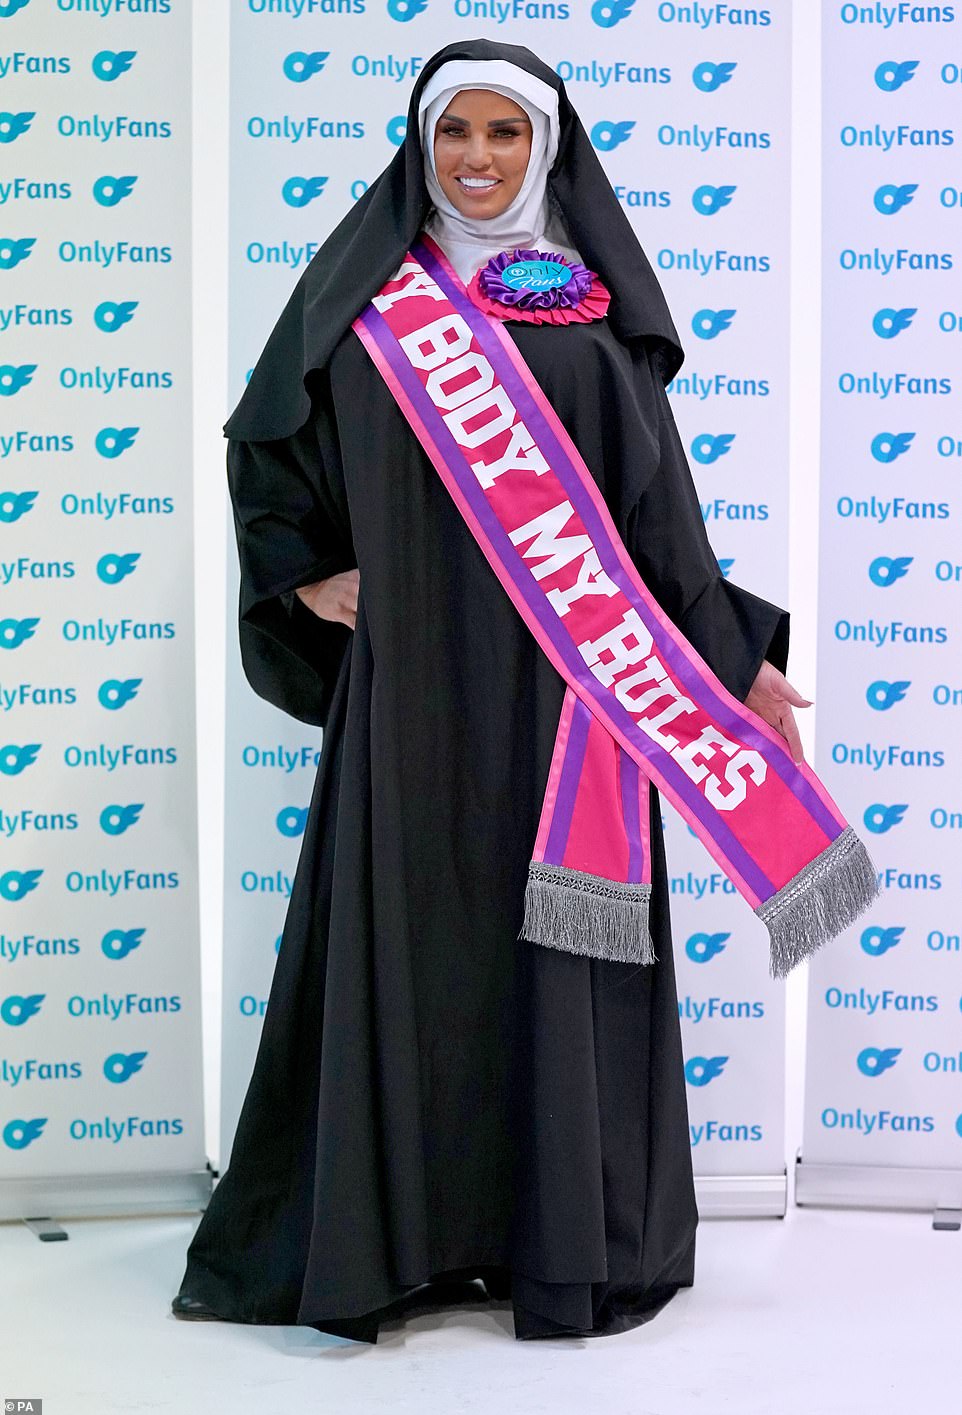 Katie Price covers up in nun's habit to reveal she's joining Only Fans 1